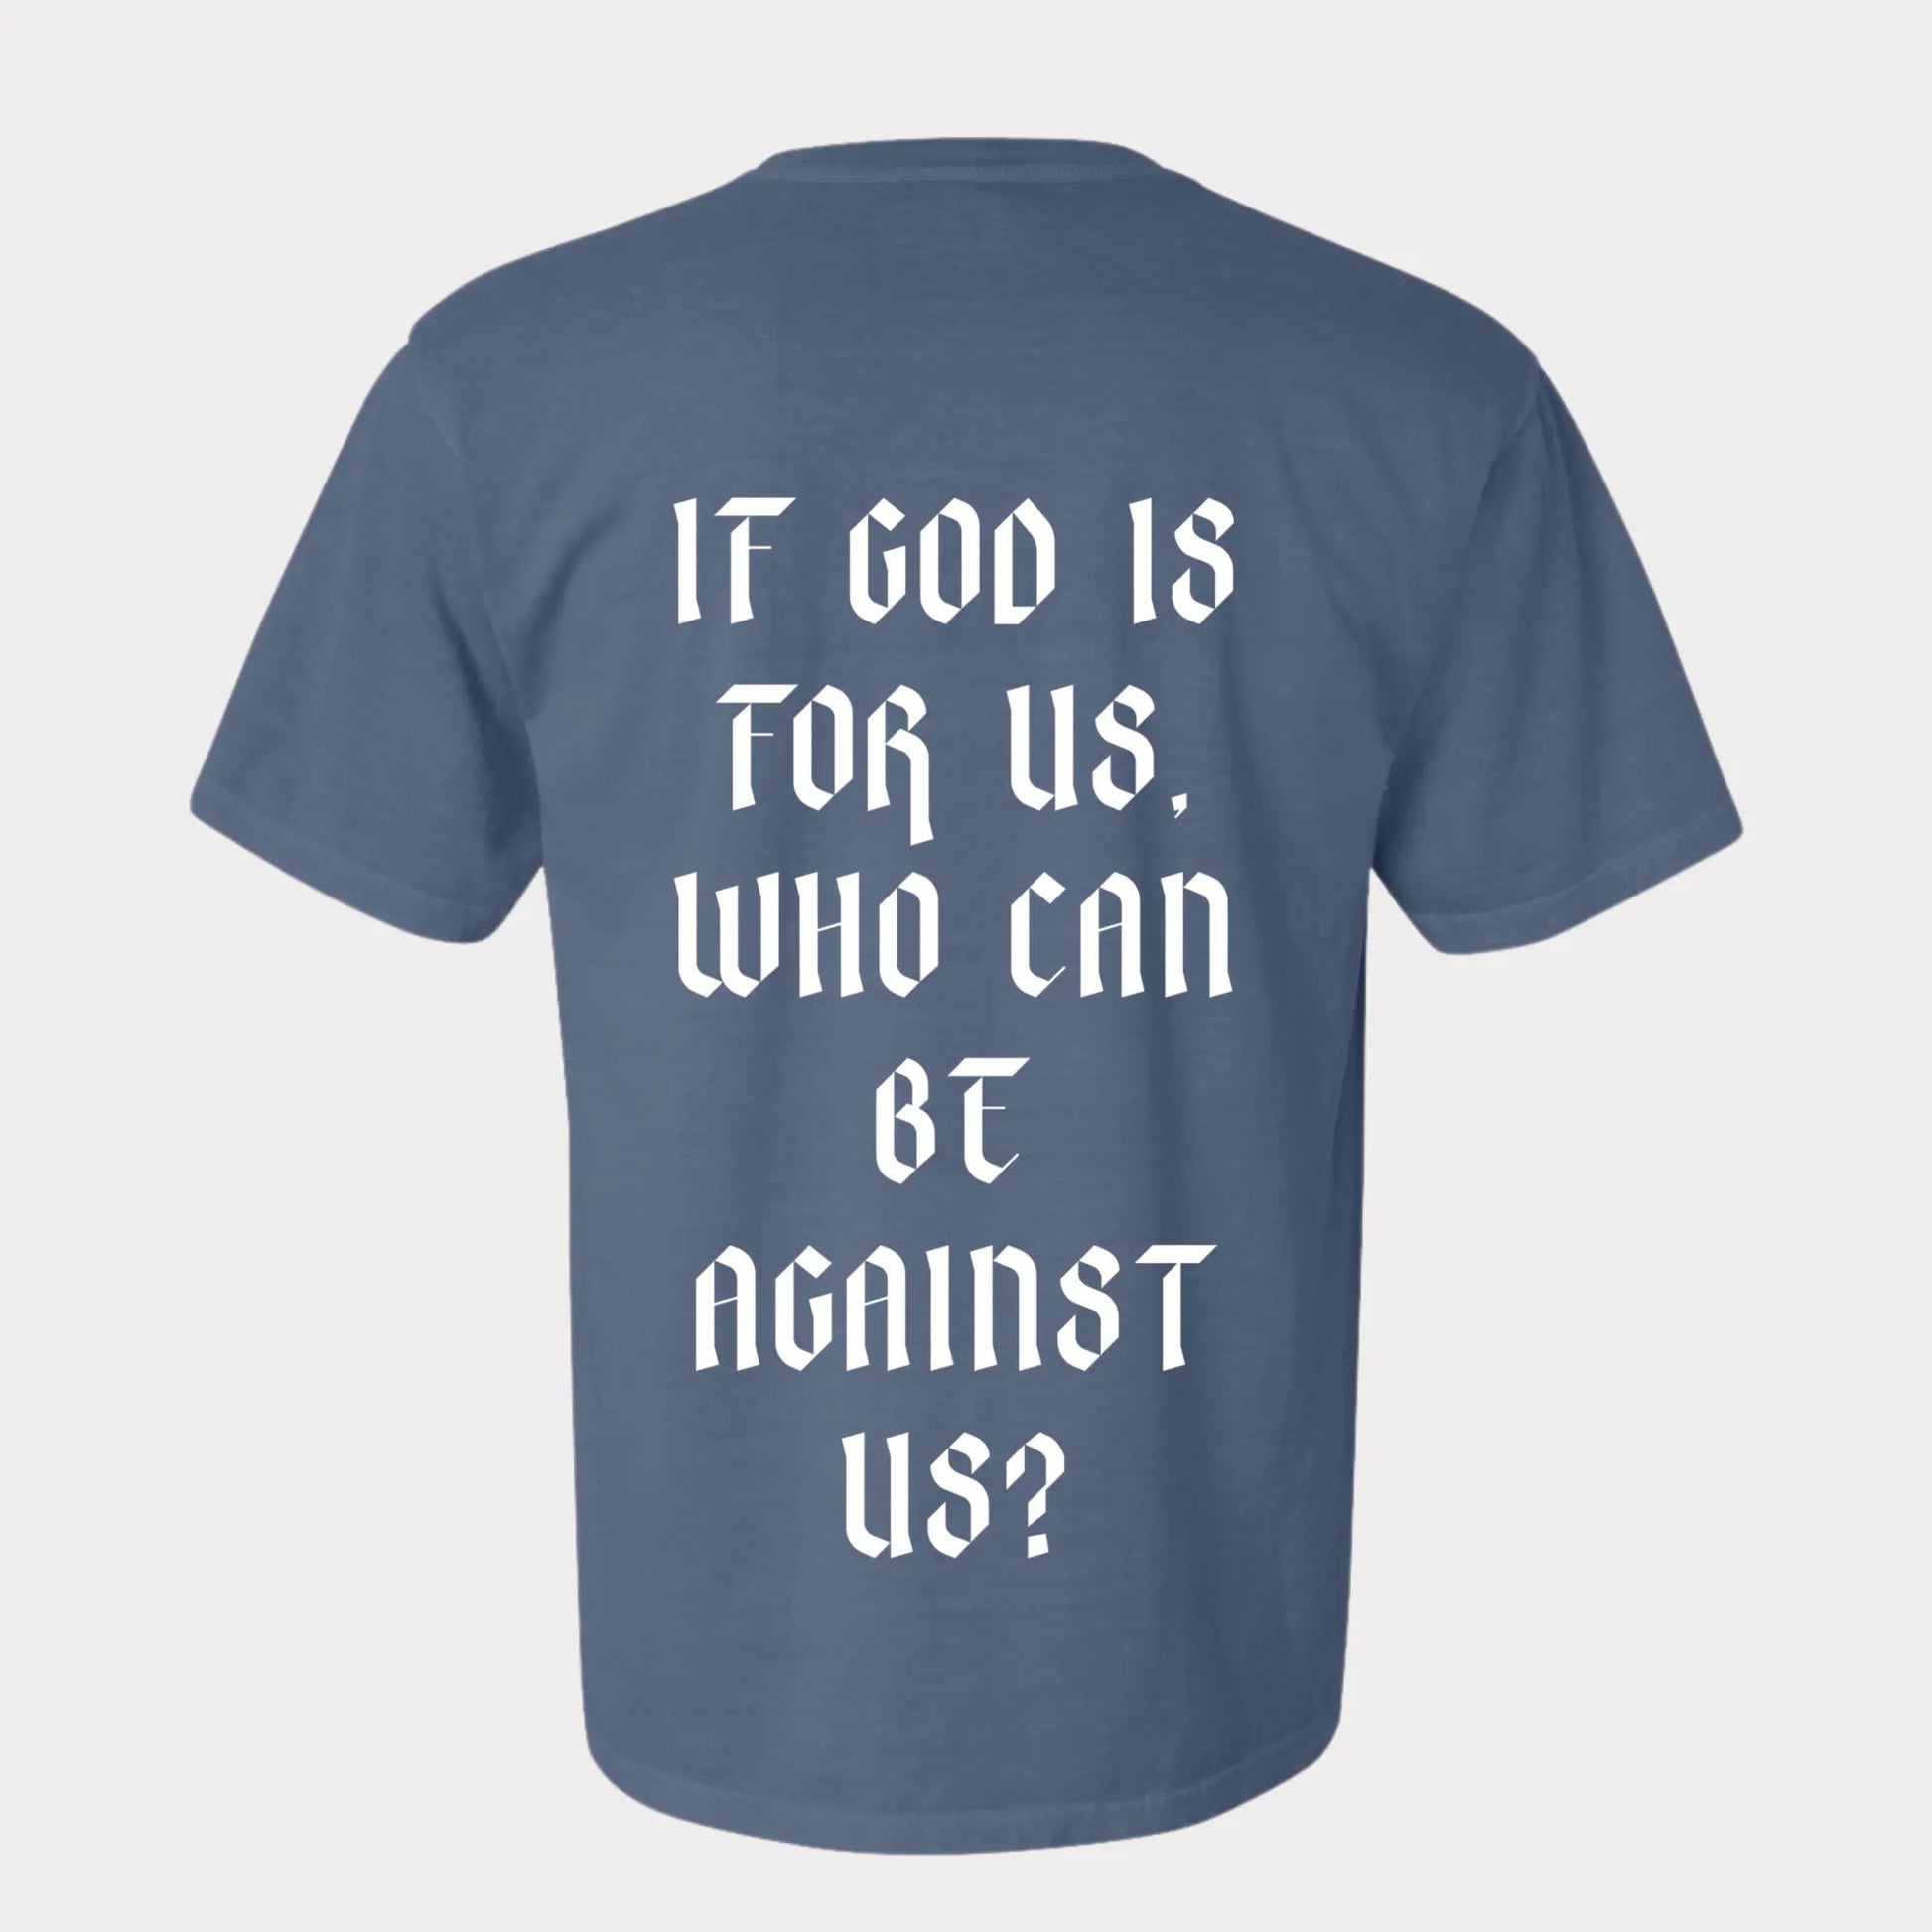 Romans 8:31 T-shirt is in the color blue jean, with a crew neck style. There is a crown logo on the left side of the chest. The Romans 8:31 T-shirt is comfortable and fitted. Size up for an oversized look. On a Neutral Colored background. The back reads “If God is for us who can be against us”, in bold white letters. Photos is taken outside in the sunslight.  Christian Clothing brand crown of favor